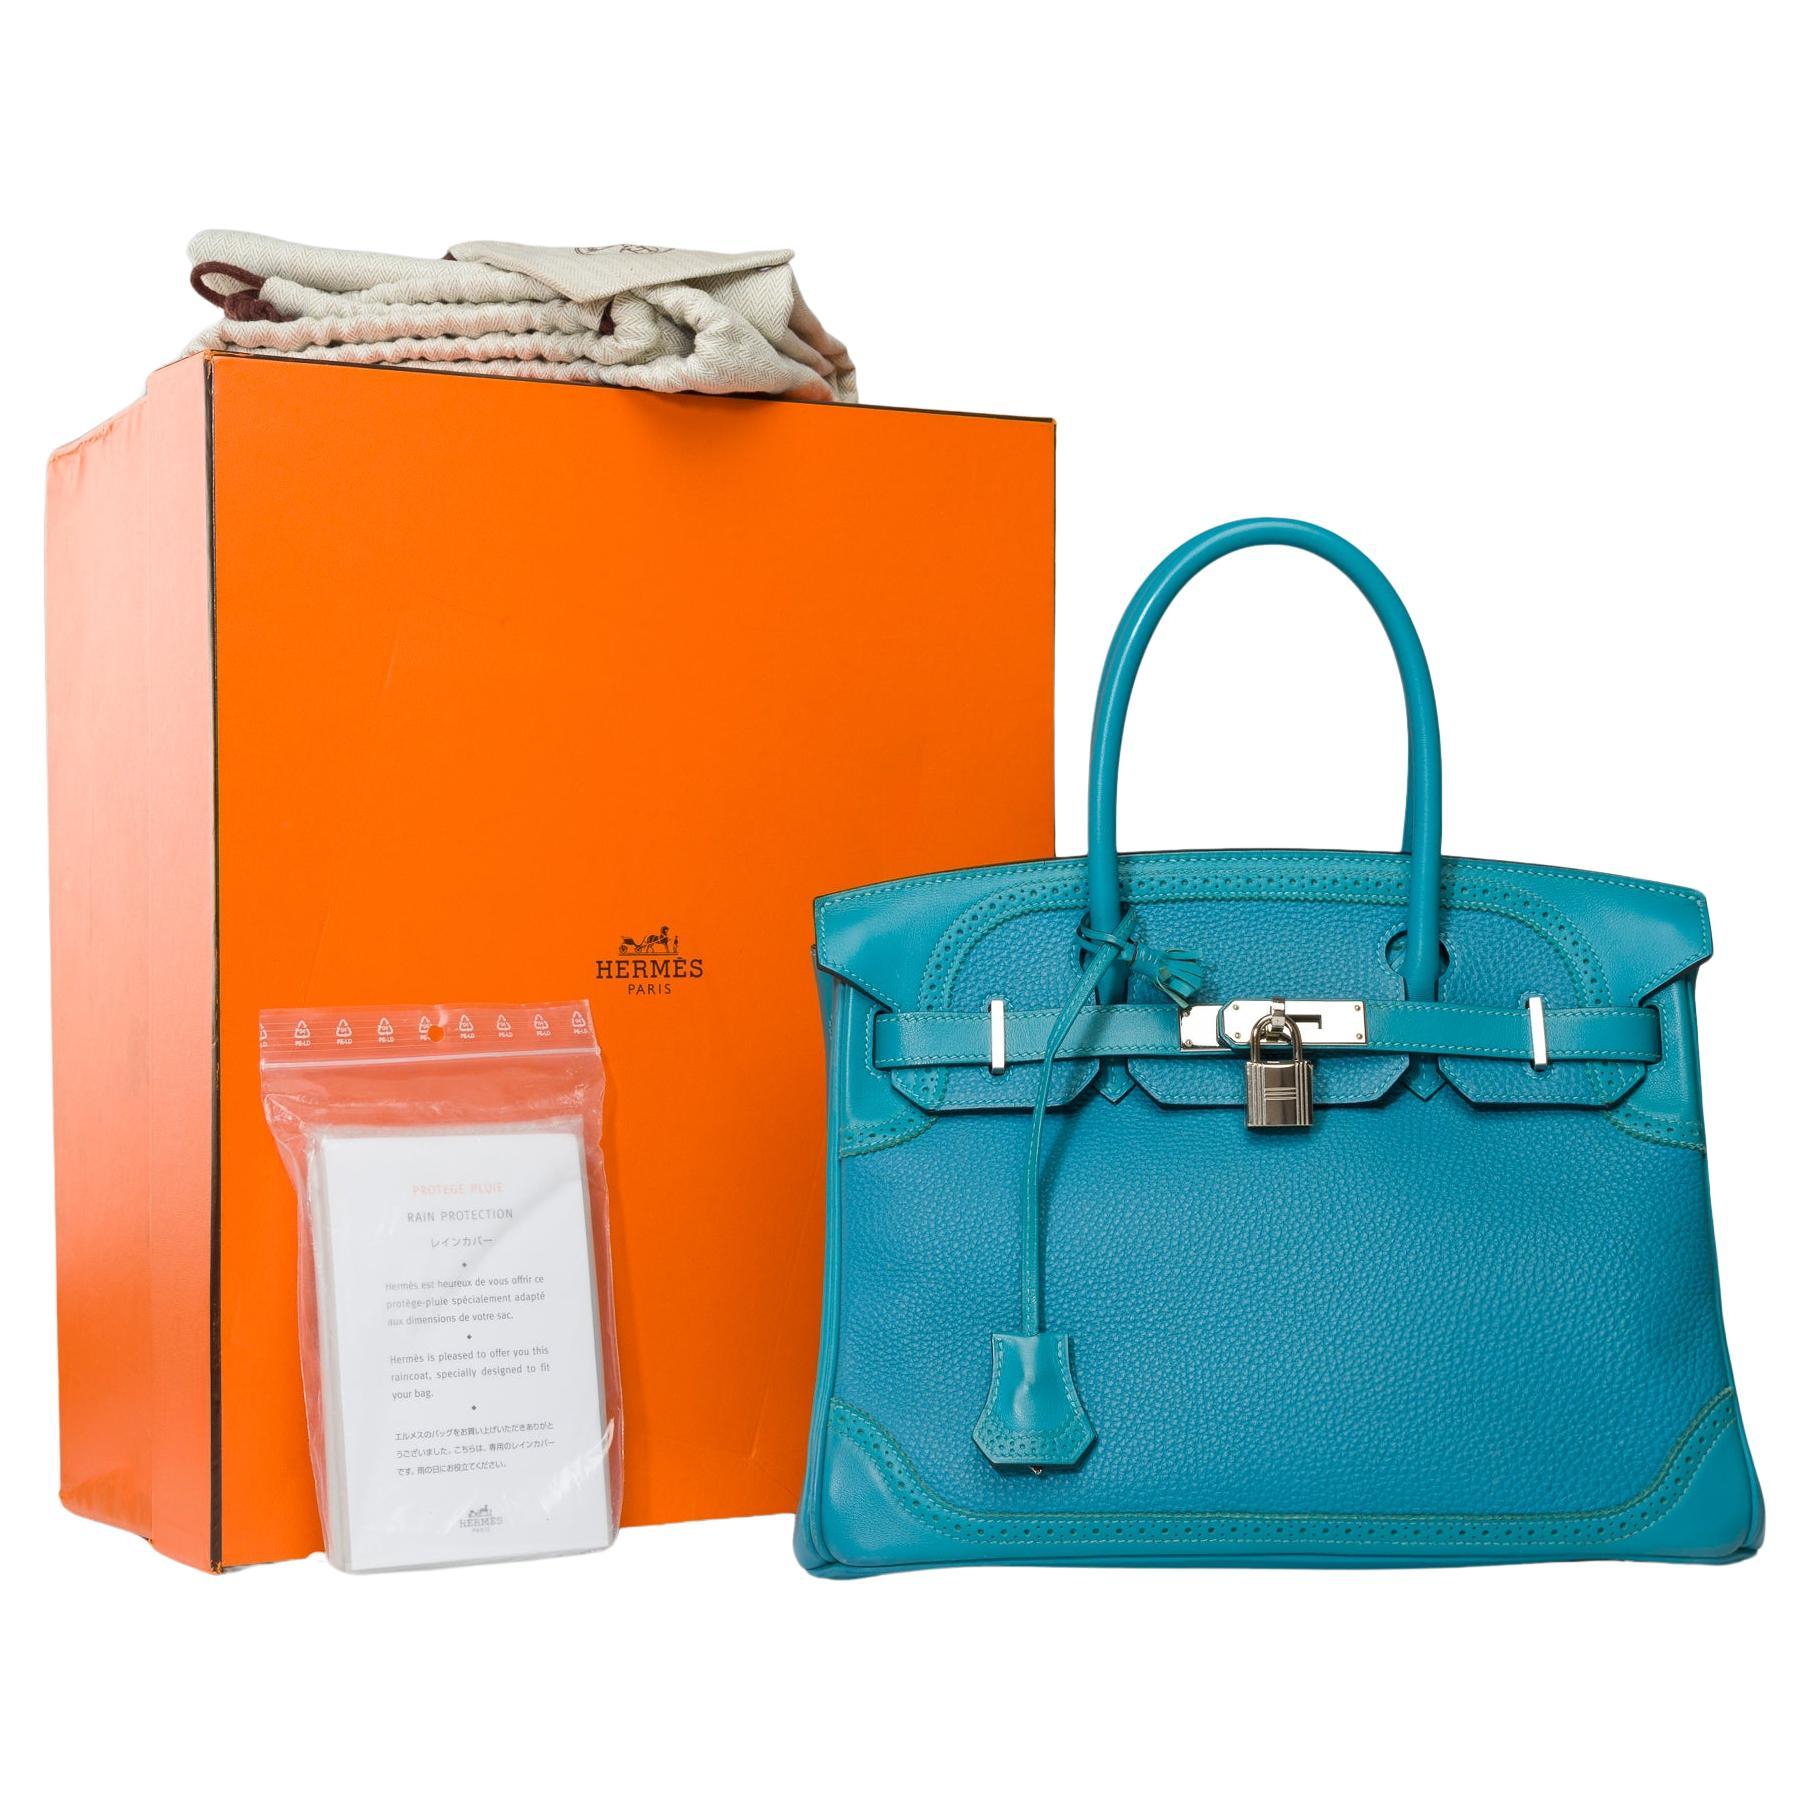 Ghillies Limited Edition Hermes Birkin 30 handbag in Turquoise Blue leather, SHW For Sale